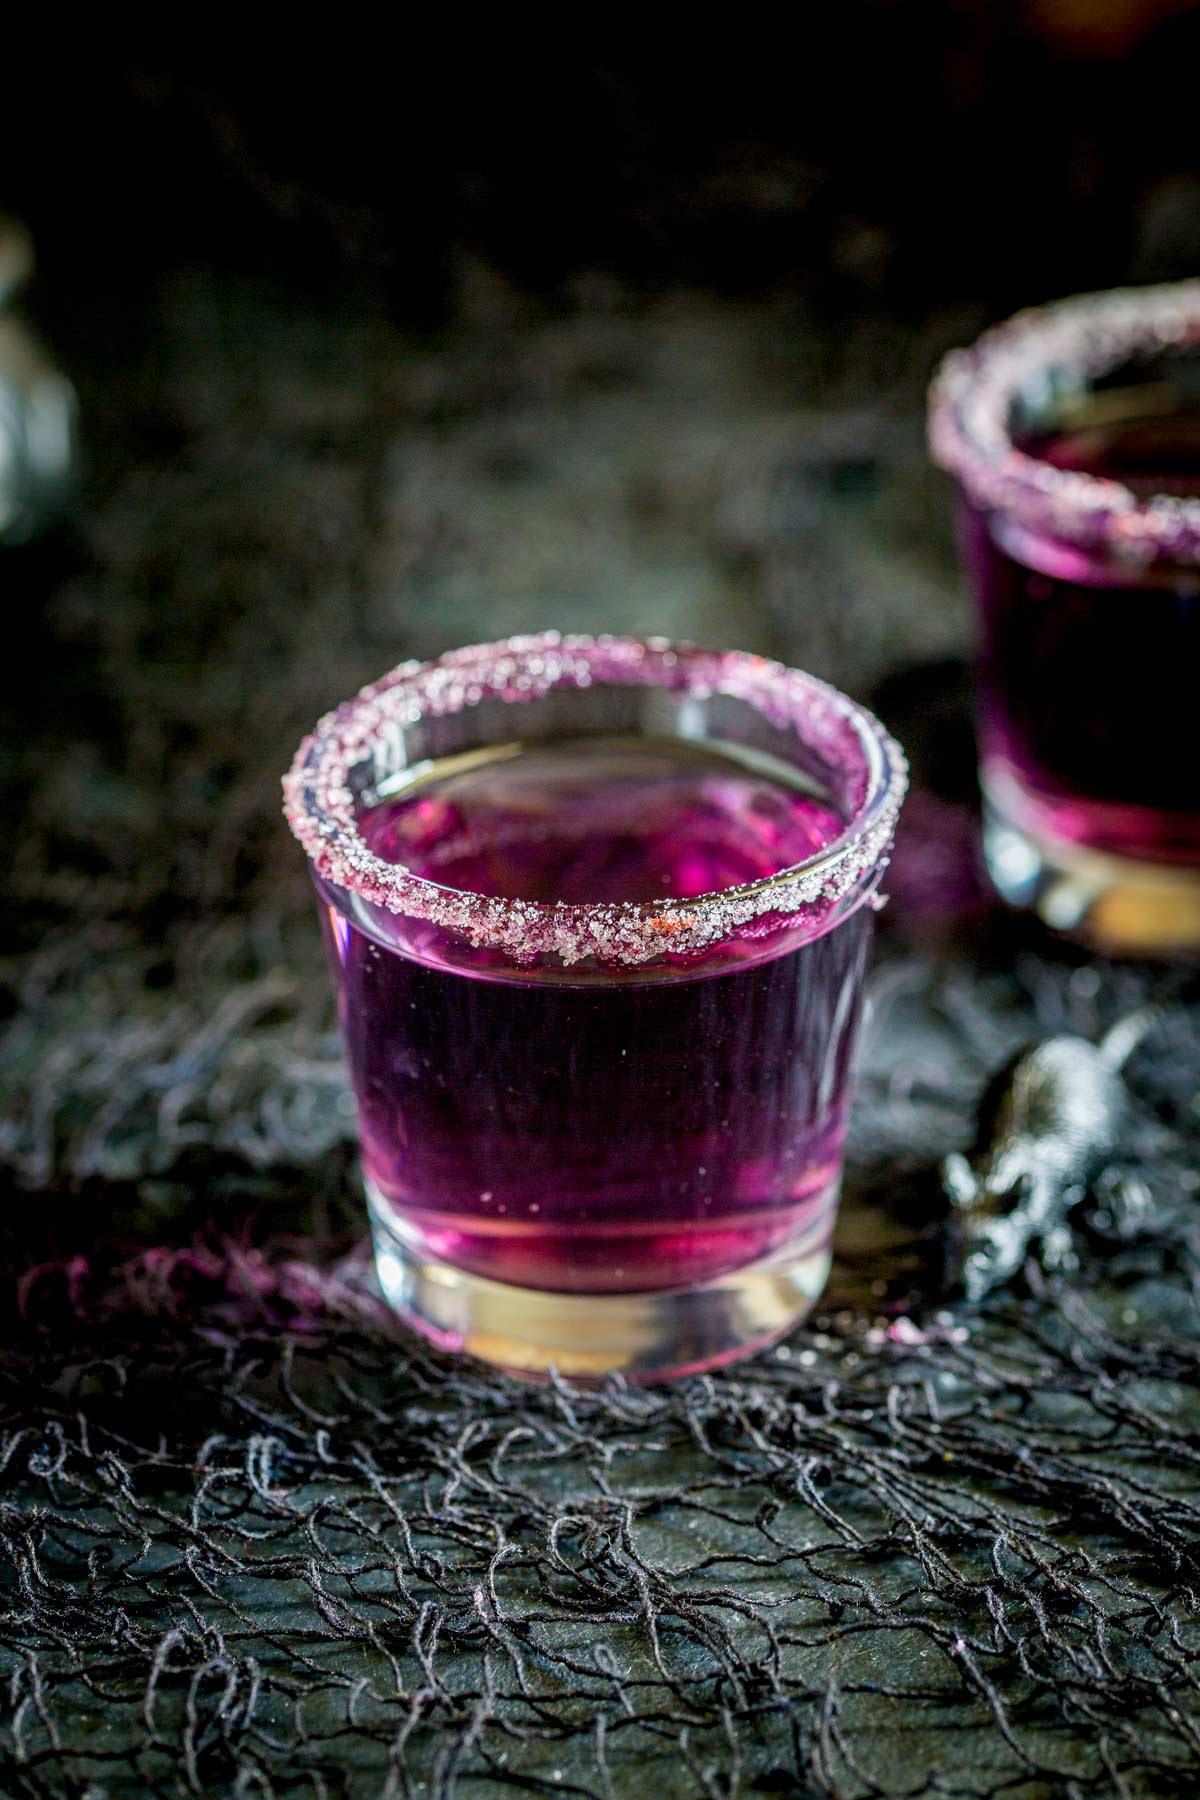 Over head shot, clearly showing the purple sugar rim on the shot glass.